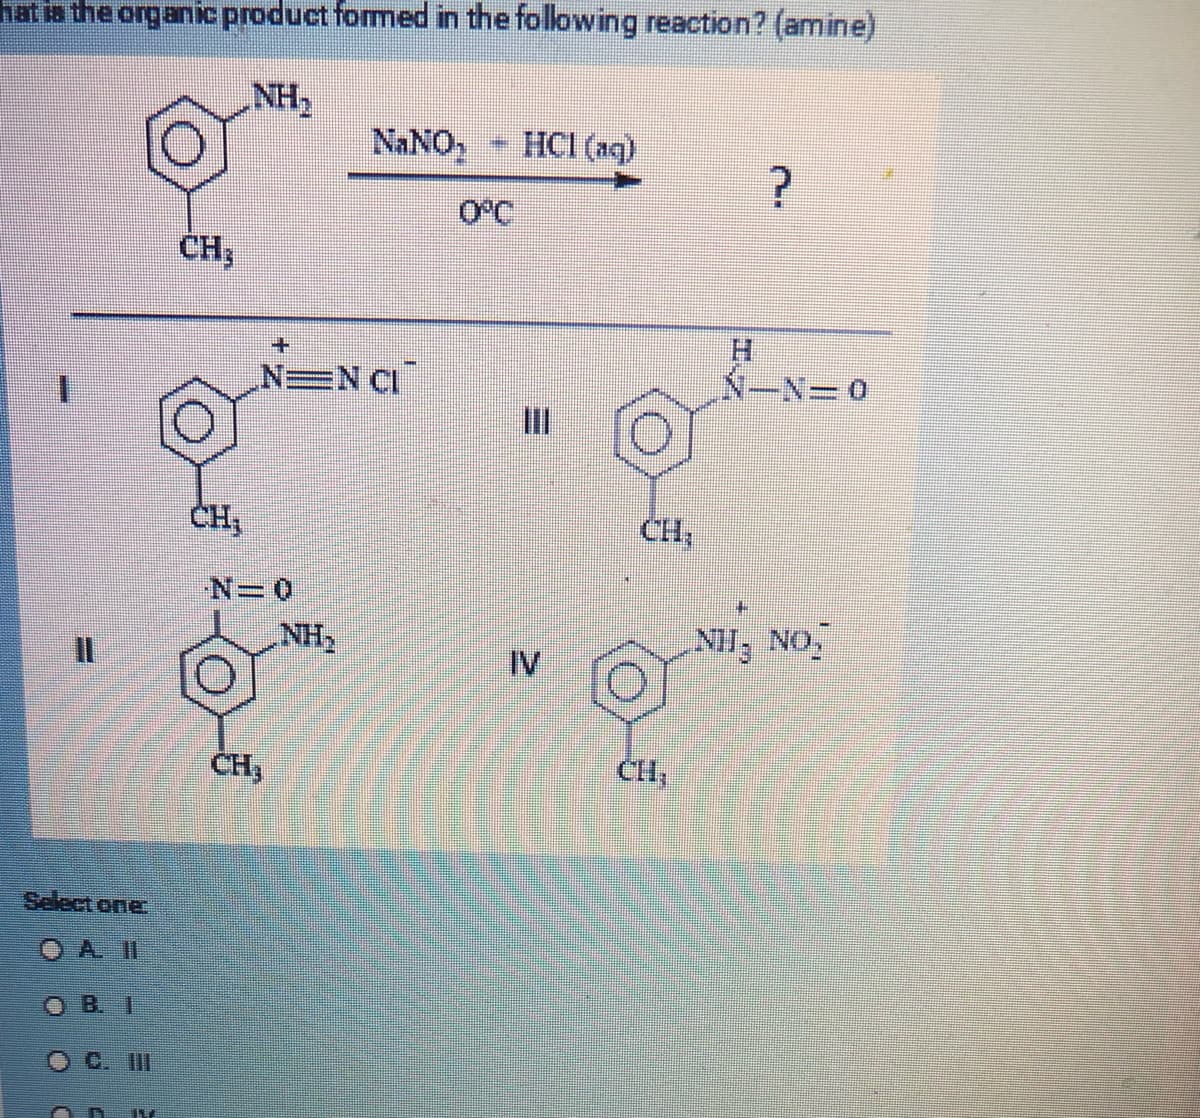 hat is the organic product formed in the following reaction? (amine)
NH₂
Select one
OA II
OBI
LU
CH3
CH,
++
NEN CI
0=N
CH,
*ON'N
NH₂
- HCl(aq)
0°C
CH₂
CH,
NHẸ NÓI
0